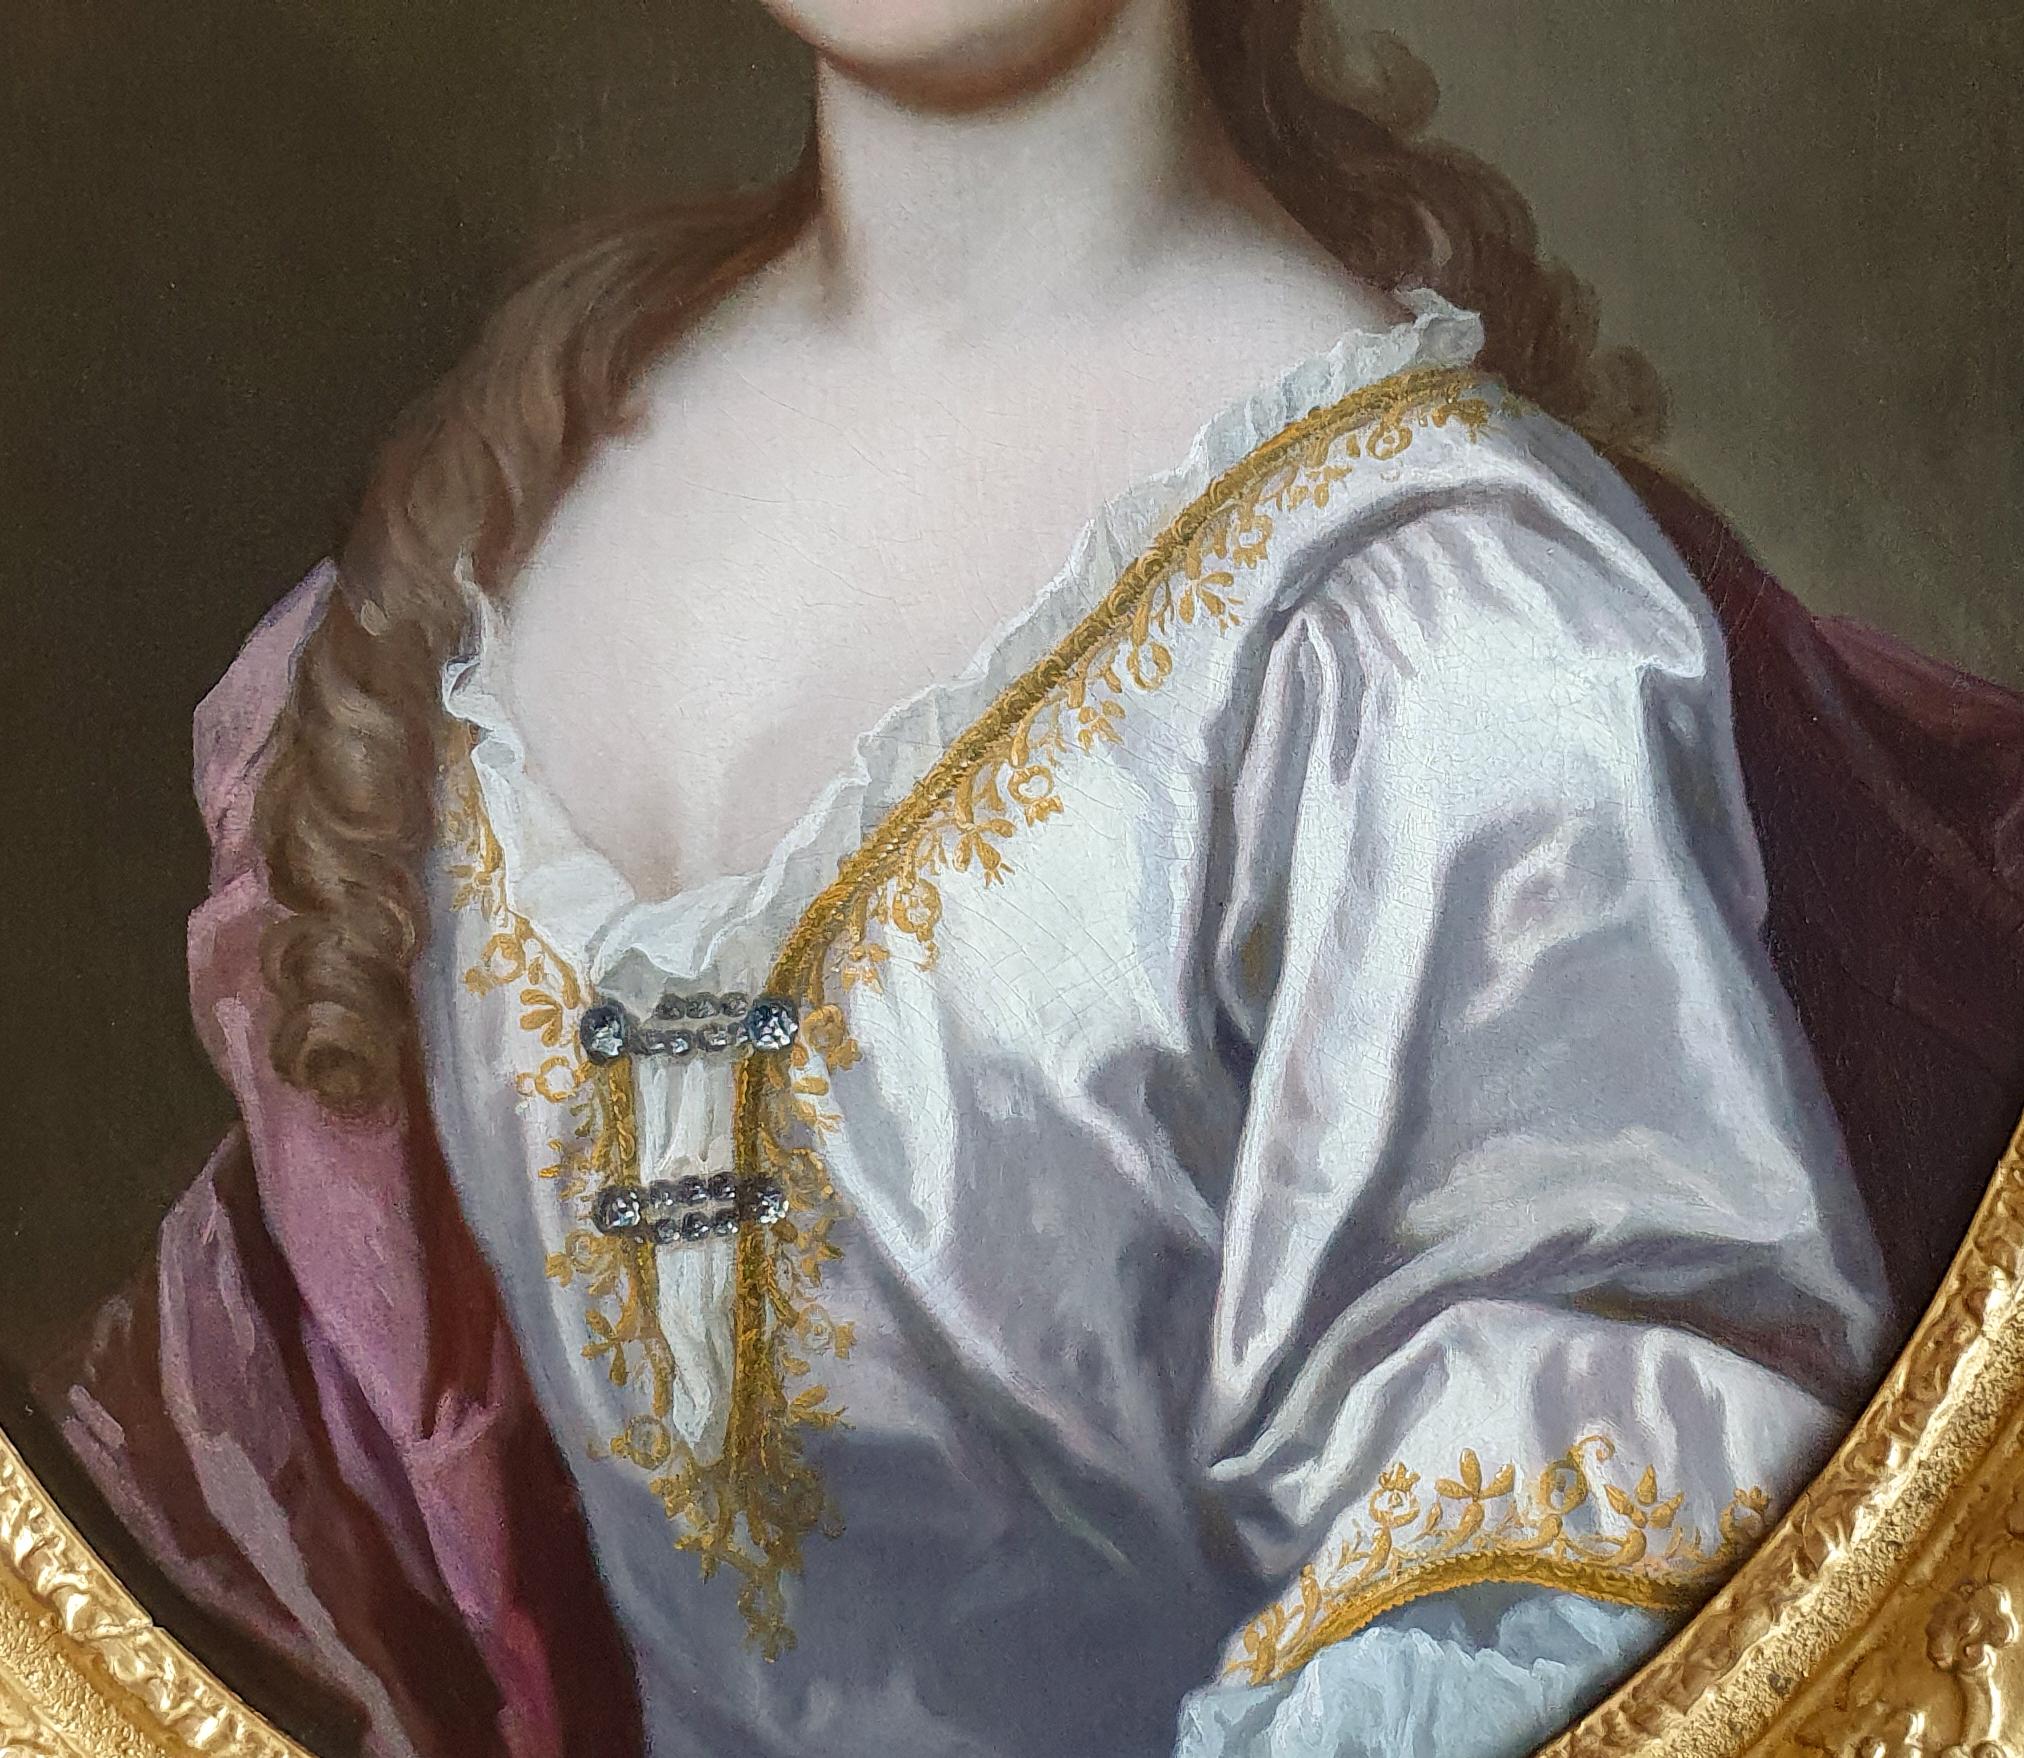 PORTRAIT of a Lady in Silver Silk Dress c.1725, Superb Gilded & Carved Frame - Old Masters Painting by (Circle of) Godfrey Kneller